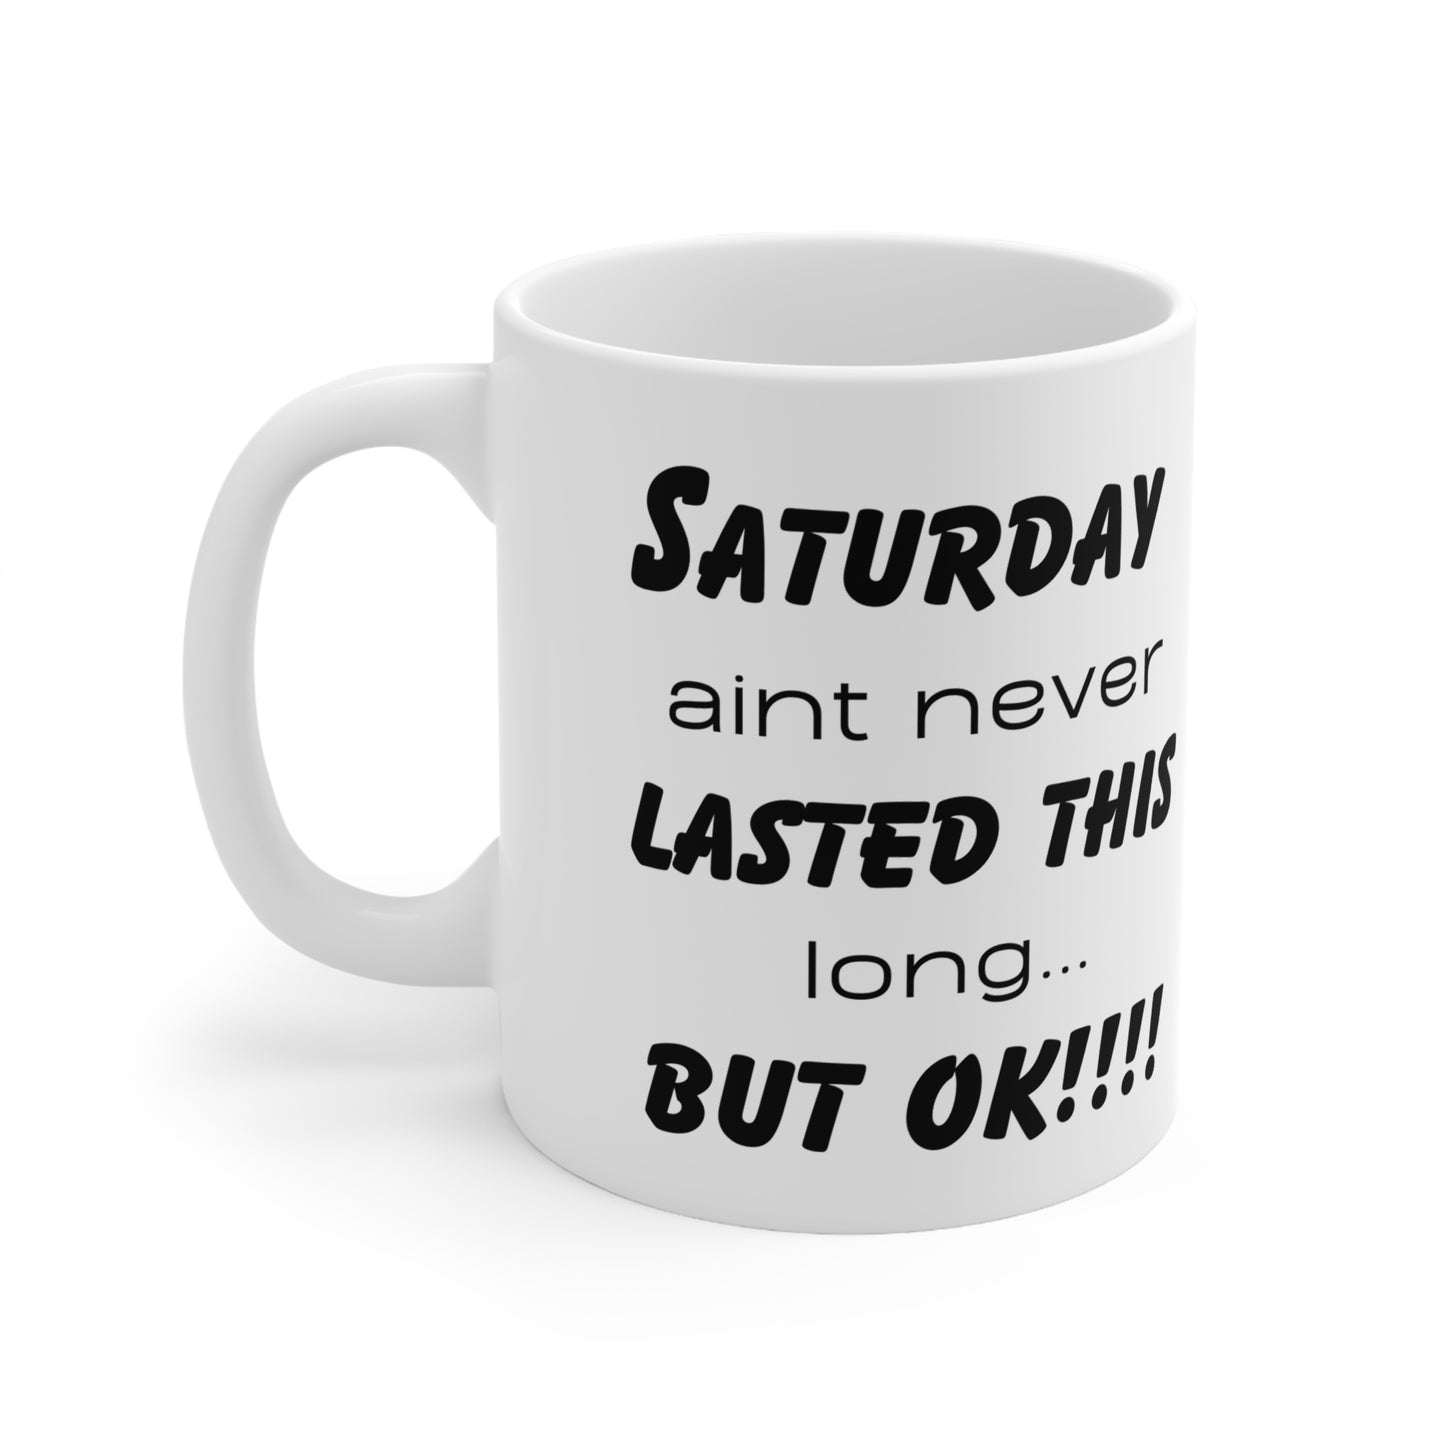 Saturday ain't never this long ...but ok! Ceramic Coffee Cups, 11oz, 15oz